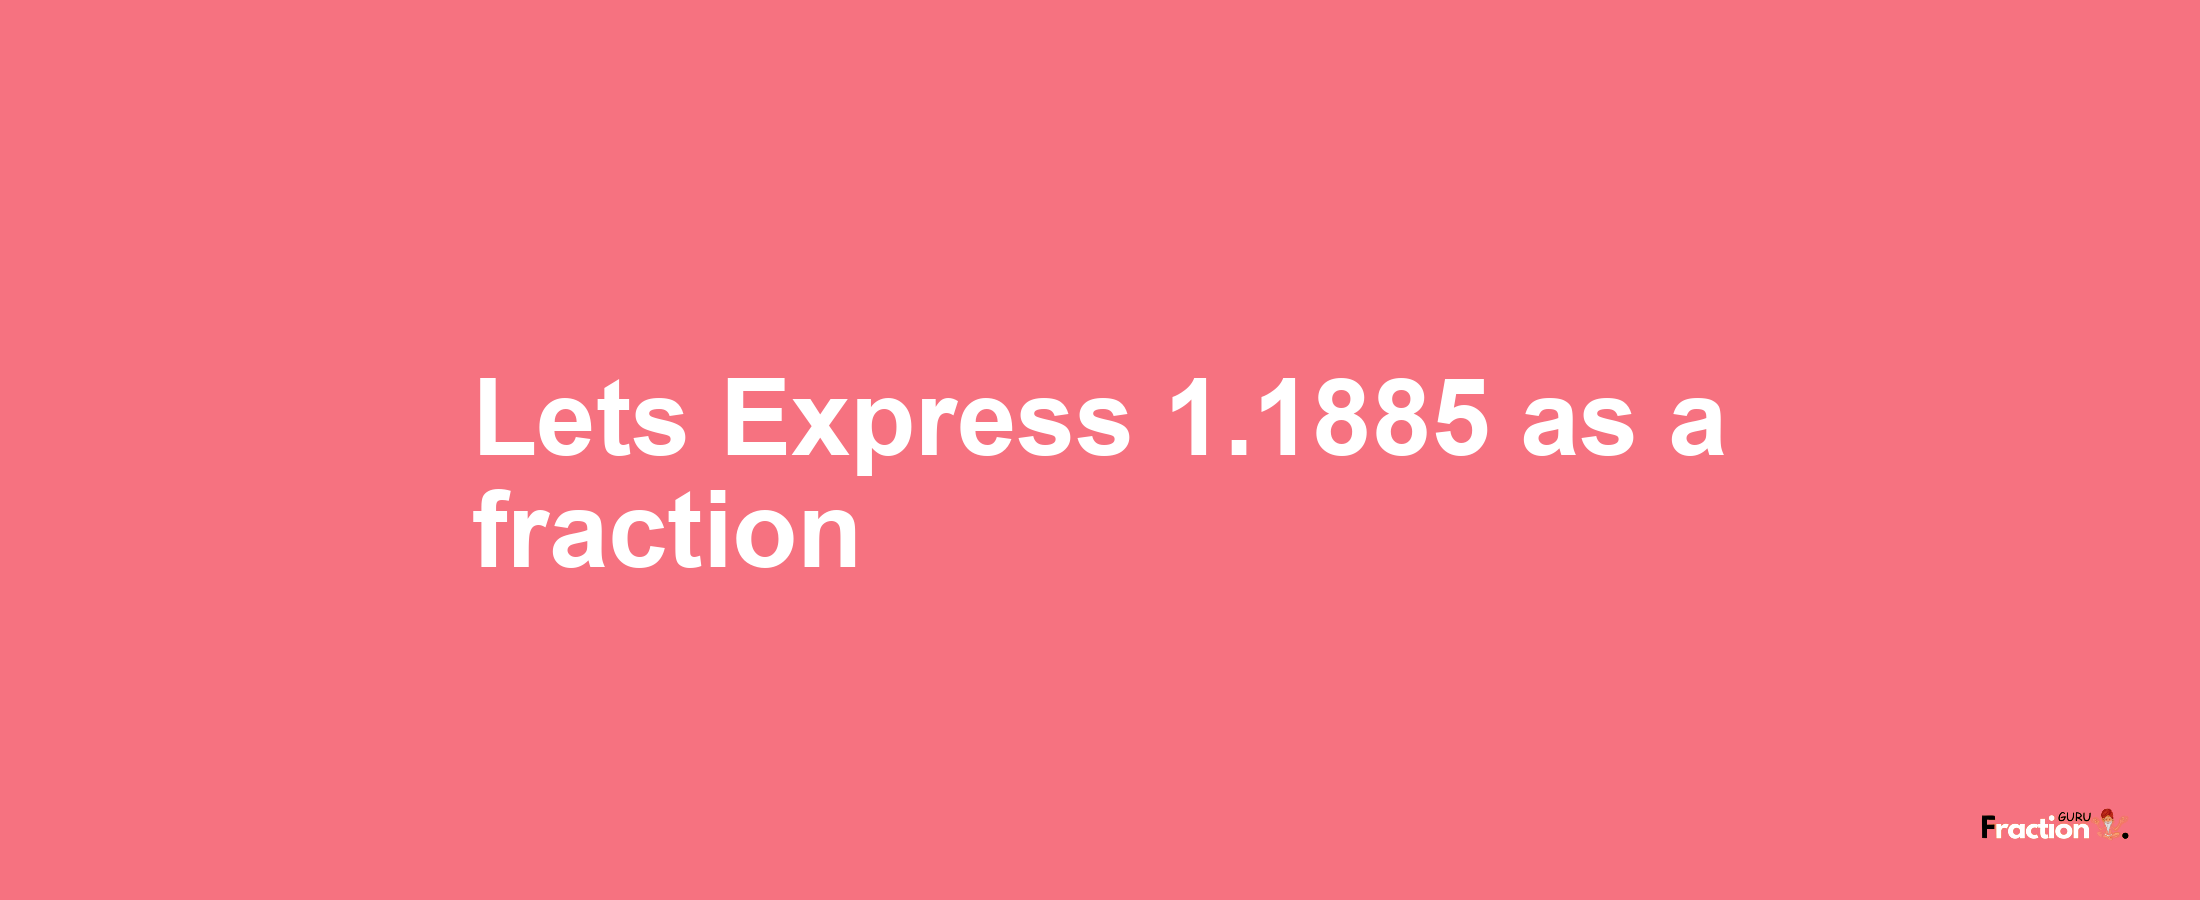 Lets Express 1.1885 as afraction